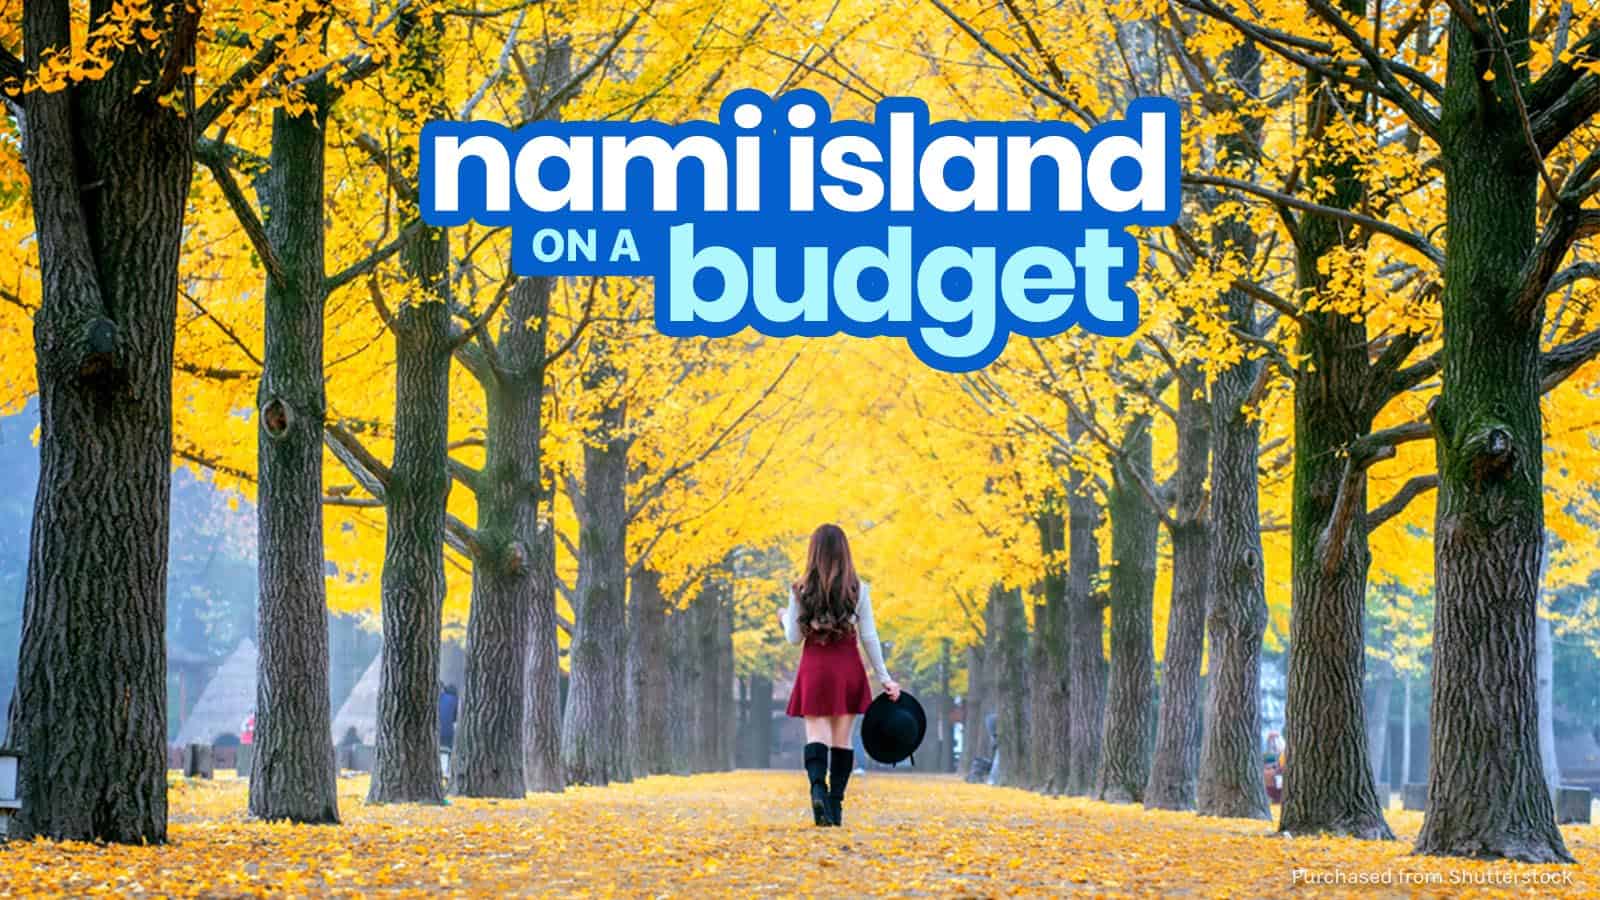 NAMI ISLAND TRAVEL GUIDE with Budget Itinerary